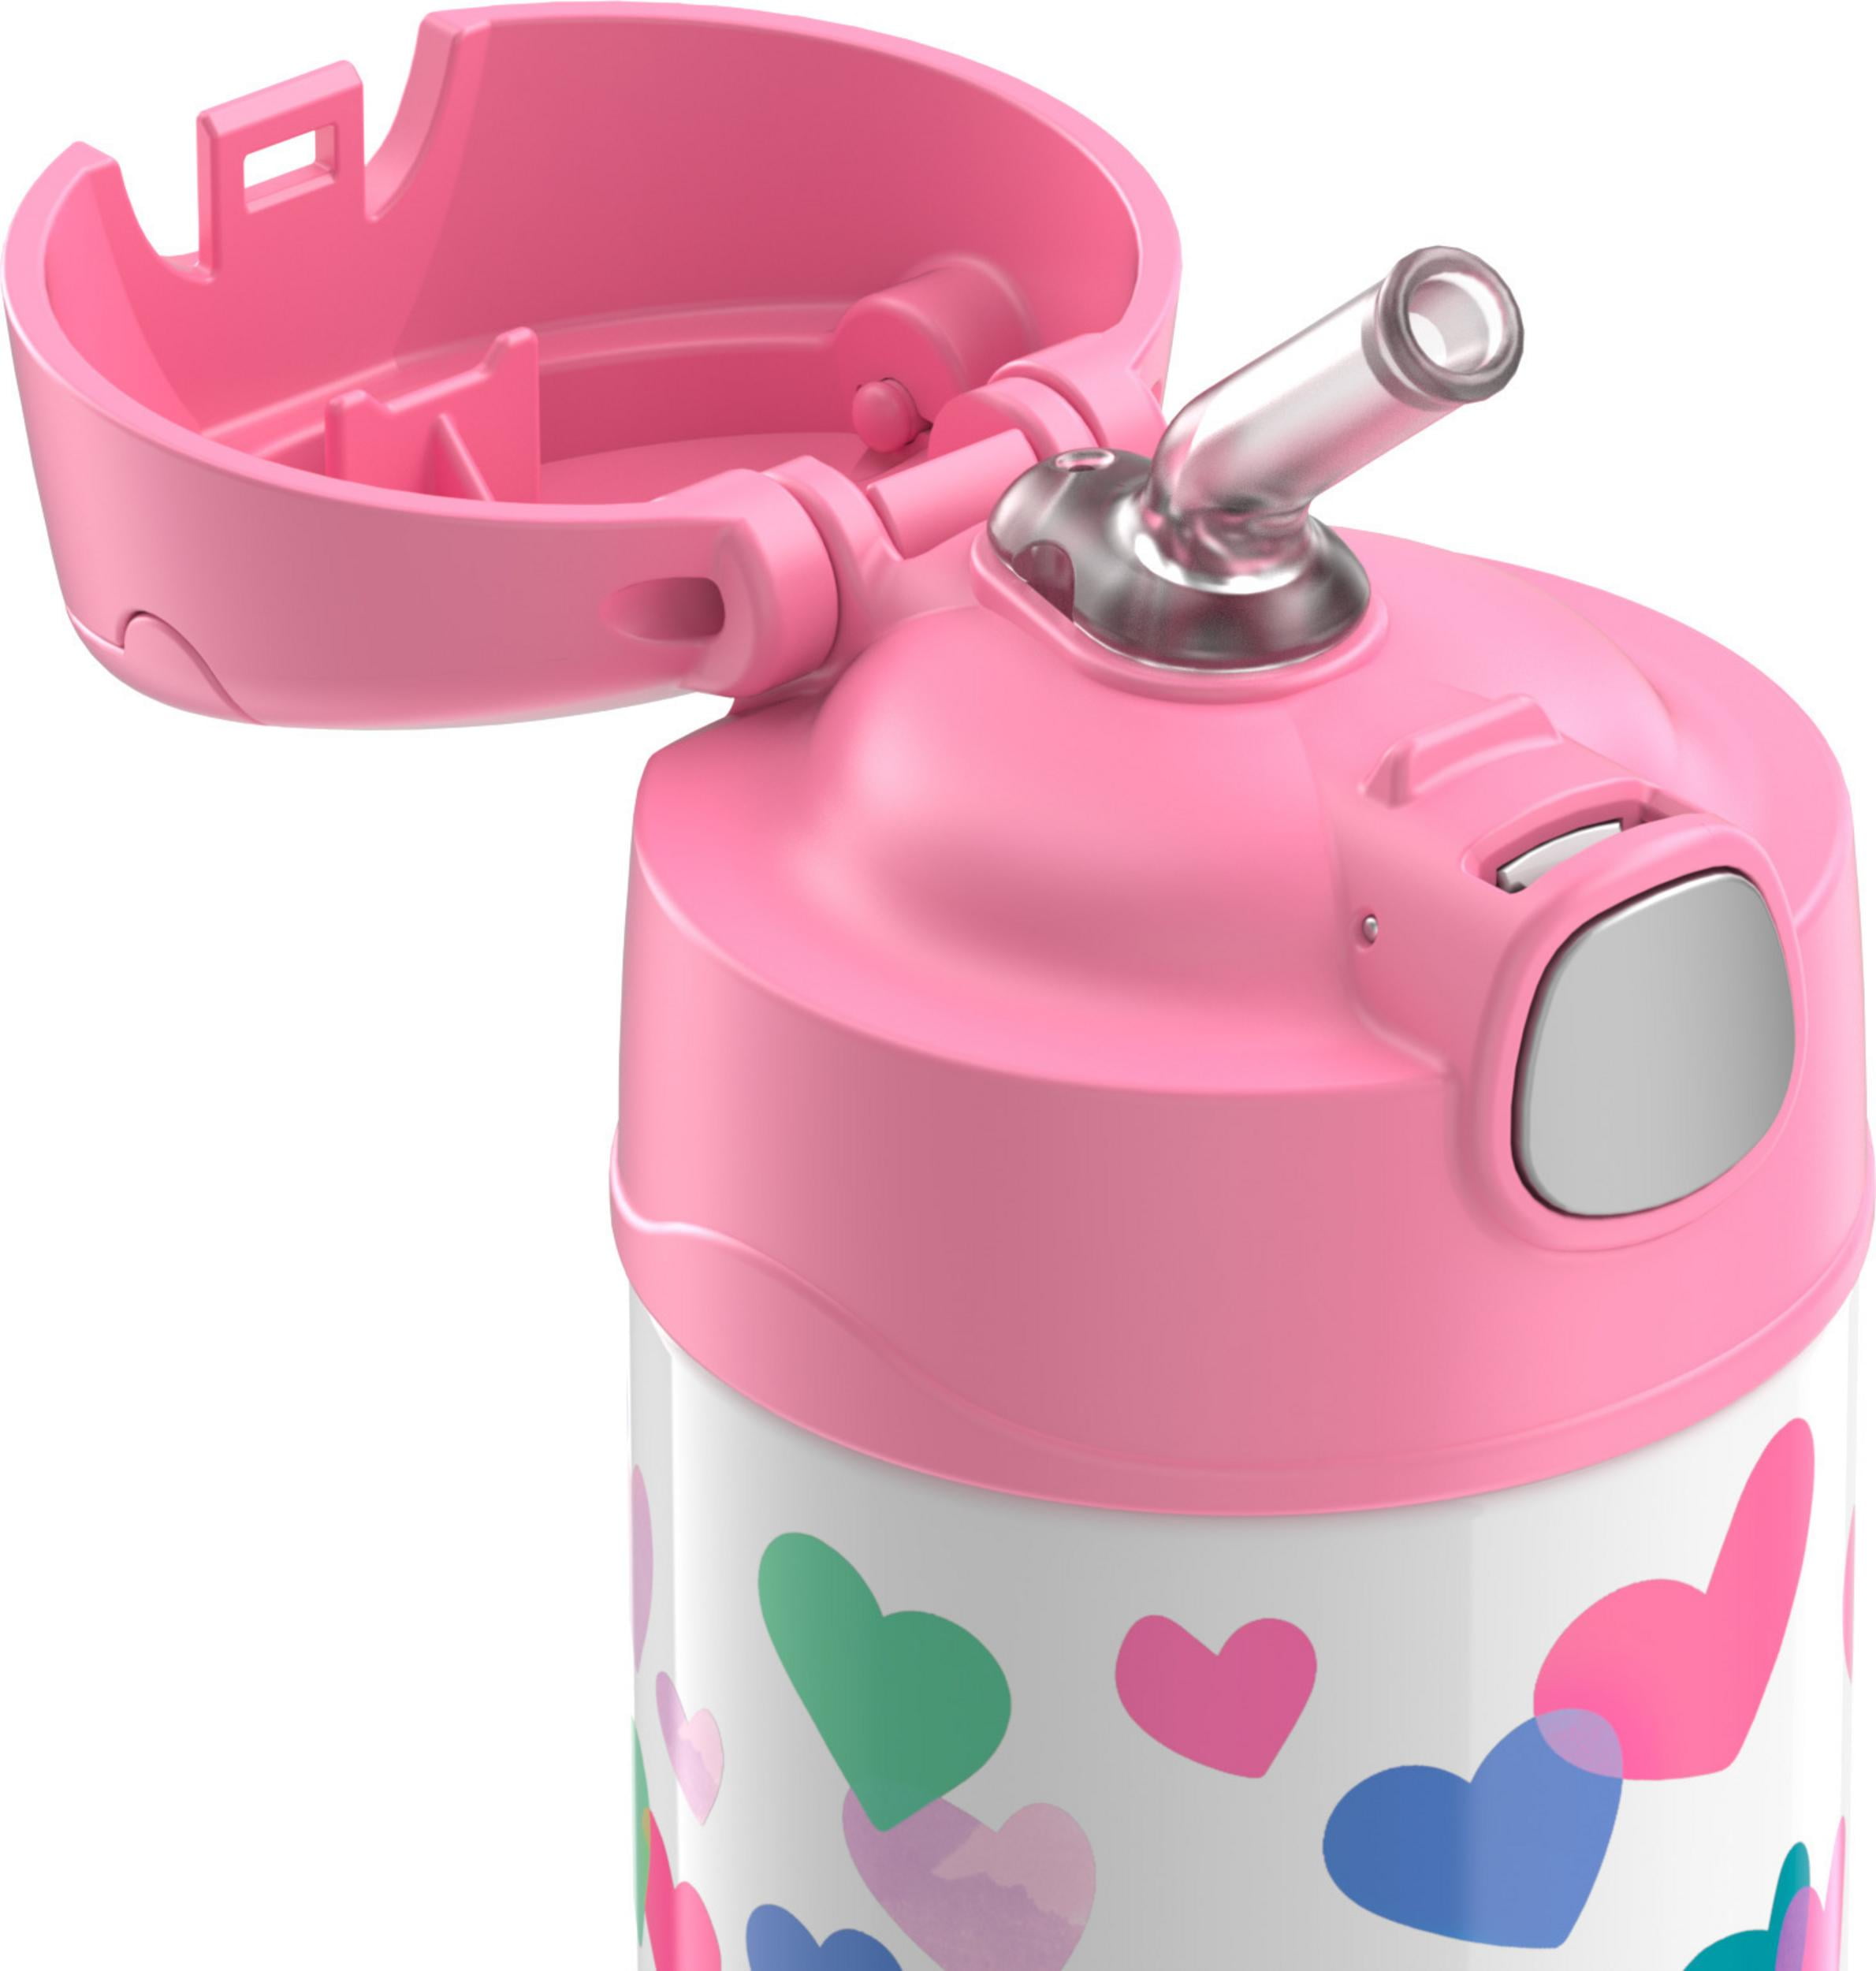 Thermos FUNtainer 12 oz. Pink Stainless Steel Vacuum-Insulated Water Bottle  F4100PK6 - The Home Depot